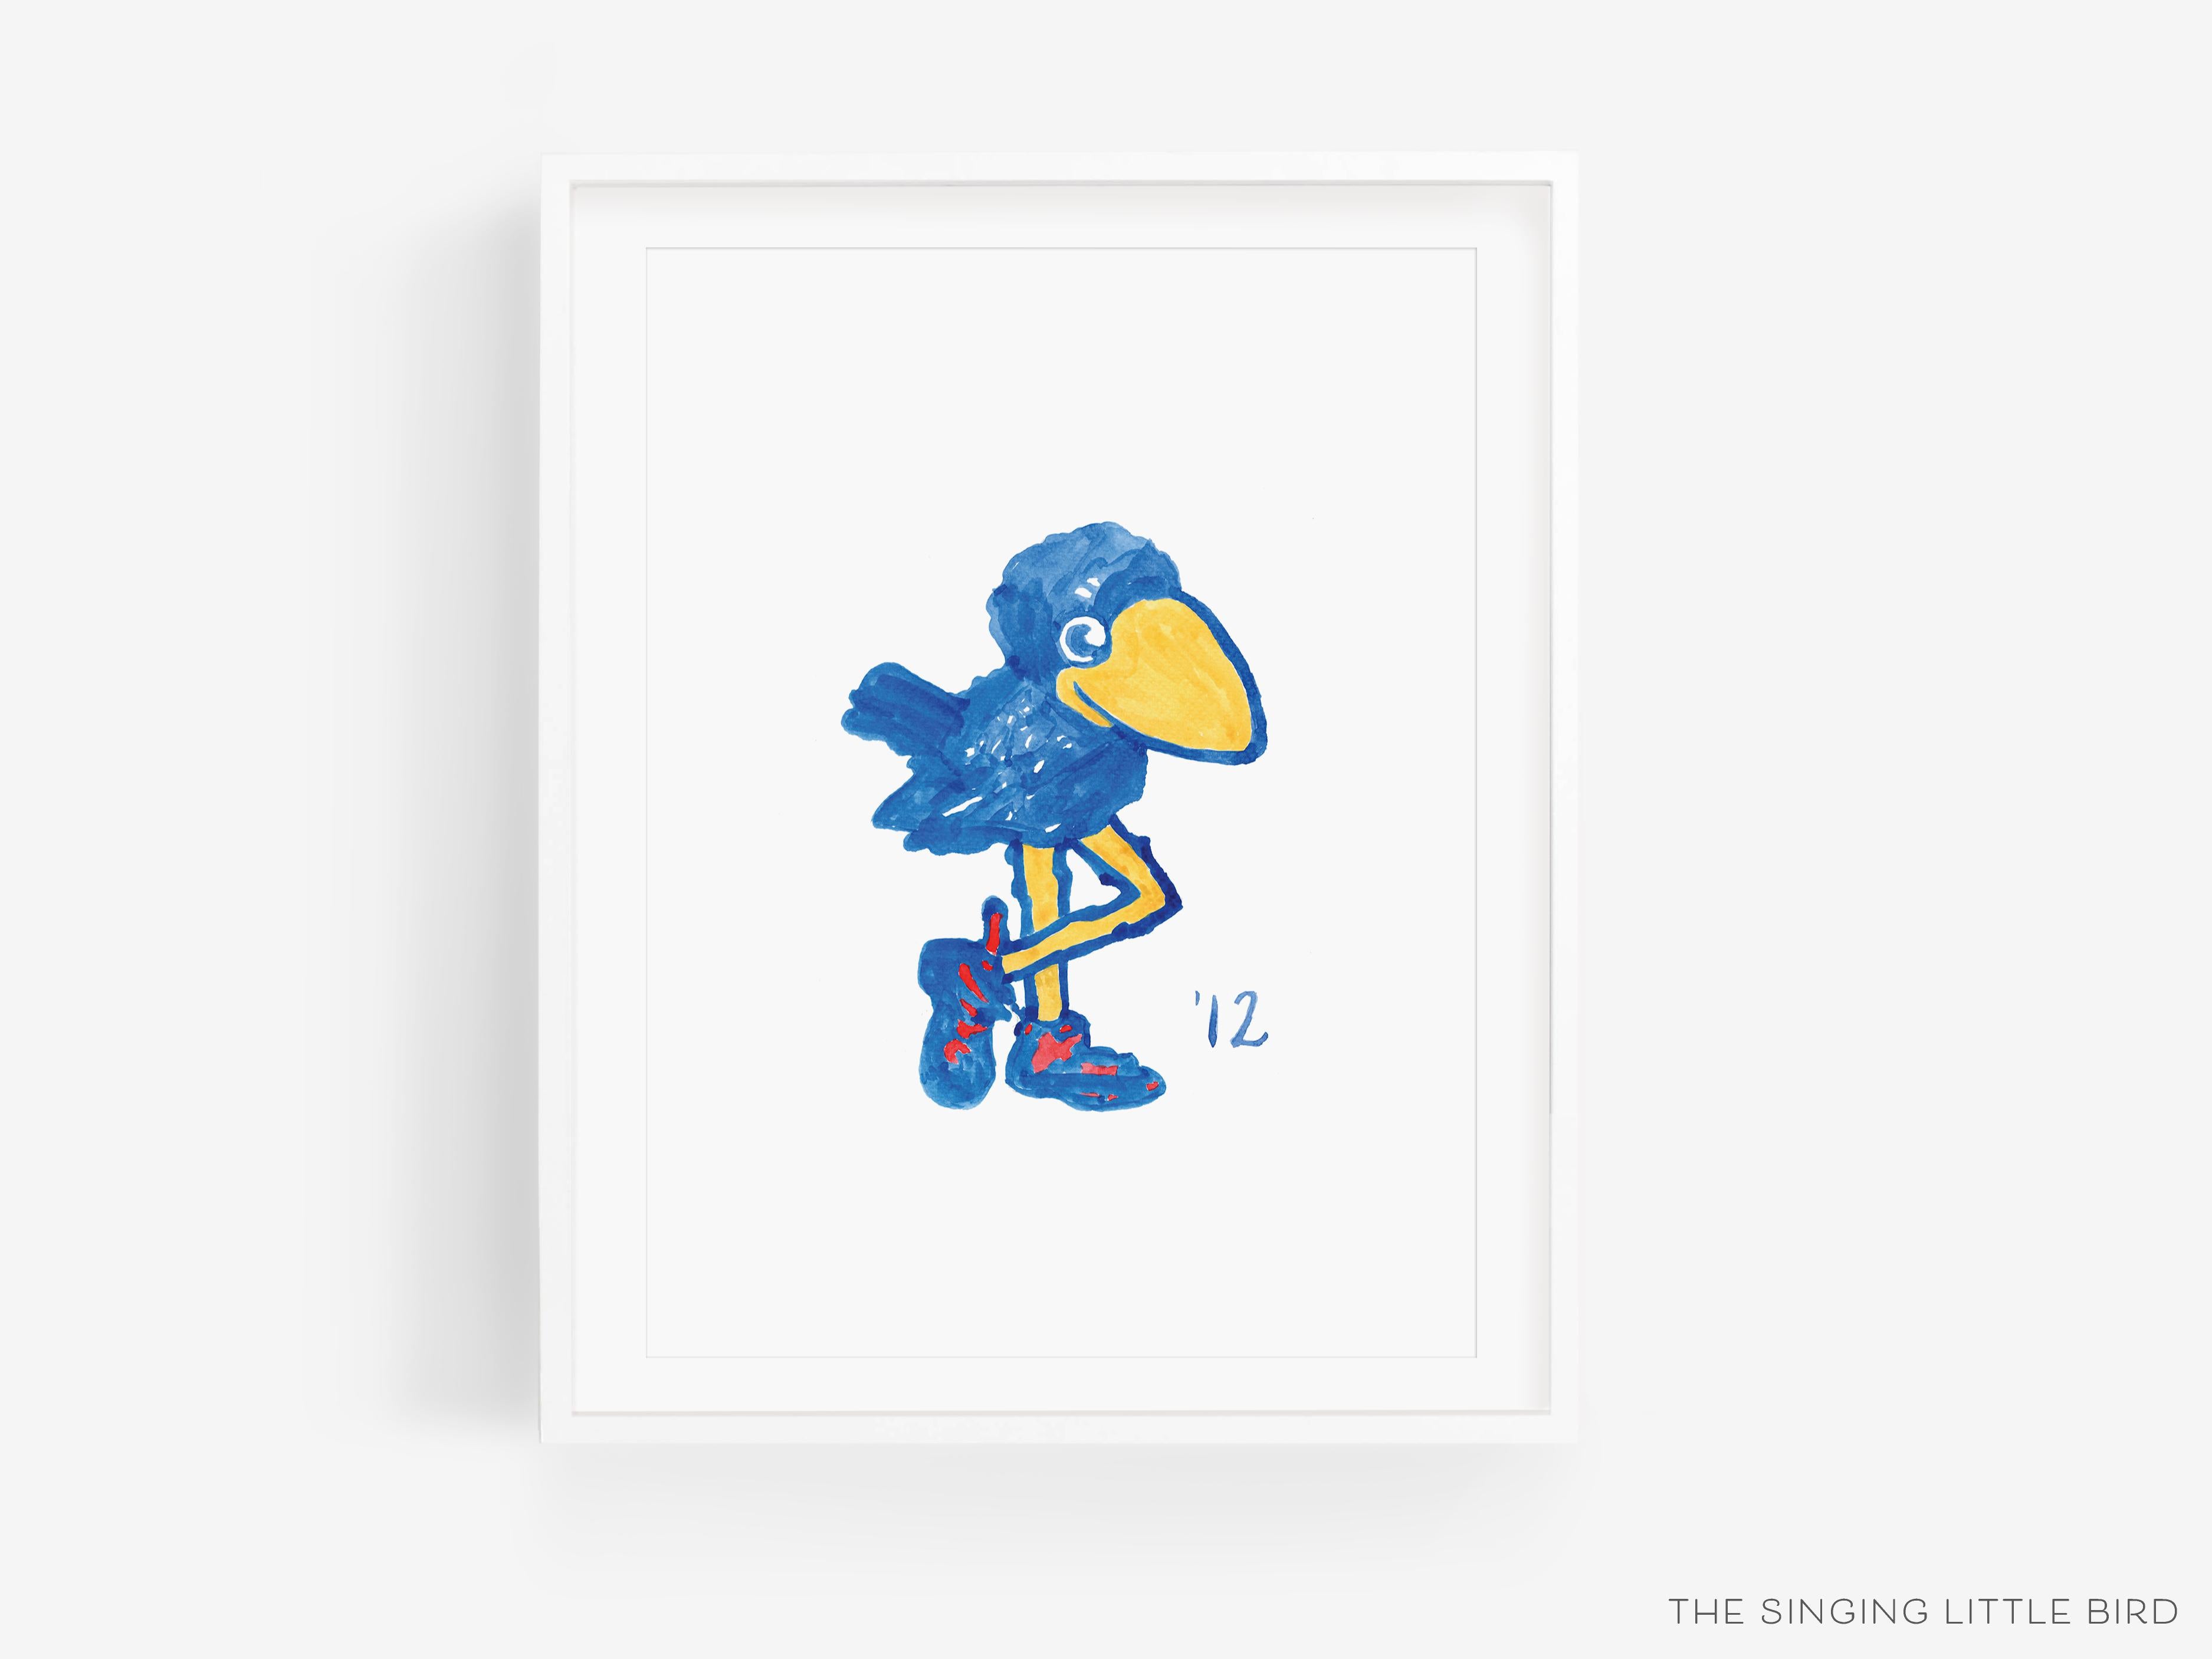 1912 Kansas Jayhawk Art Print [Officially Licensed Product]-This watercolor art print features our hand-painted Kansas Jayhawk, printed in the USA on 120lb high quality art paper. This makes a great gift or wall decor for the University of Kansas lover in your life.-The Singing Little Bird